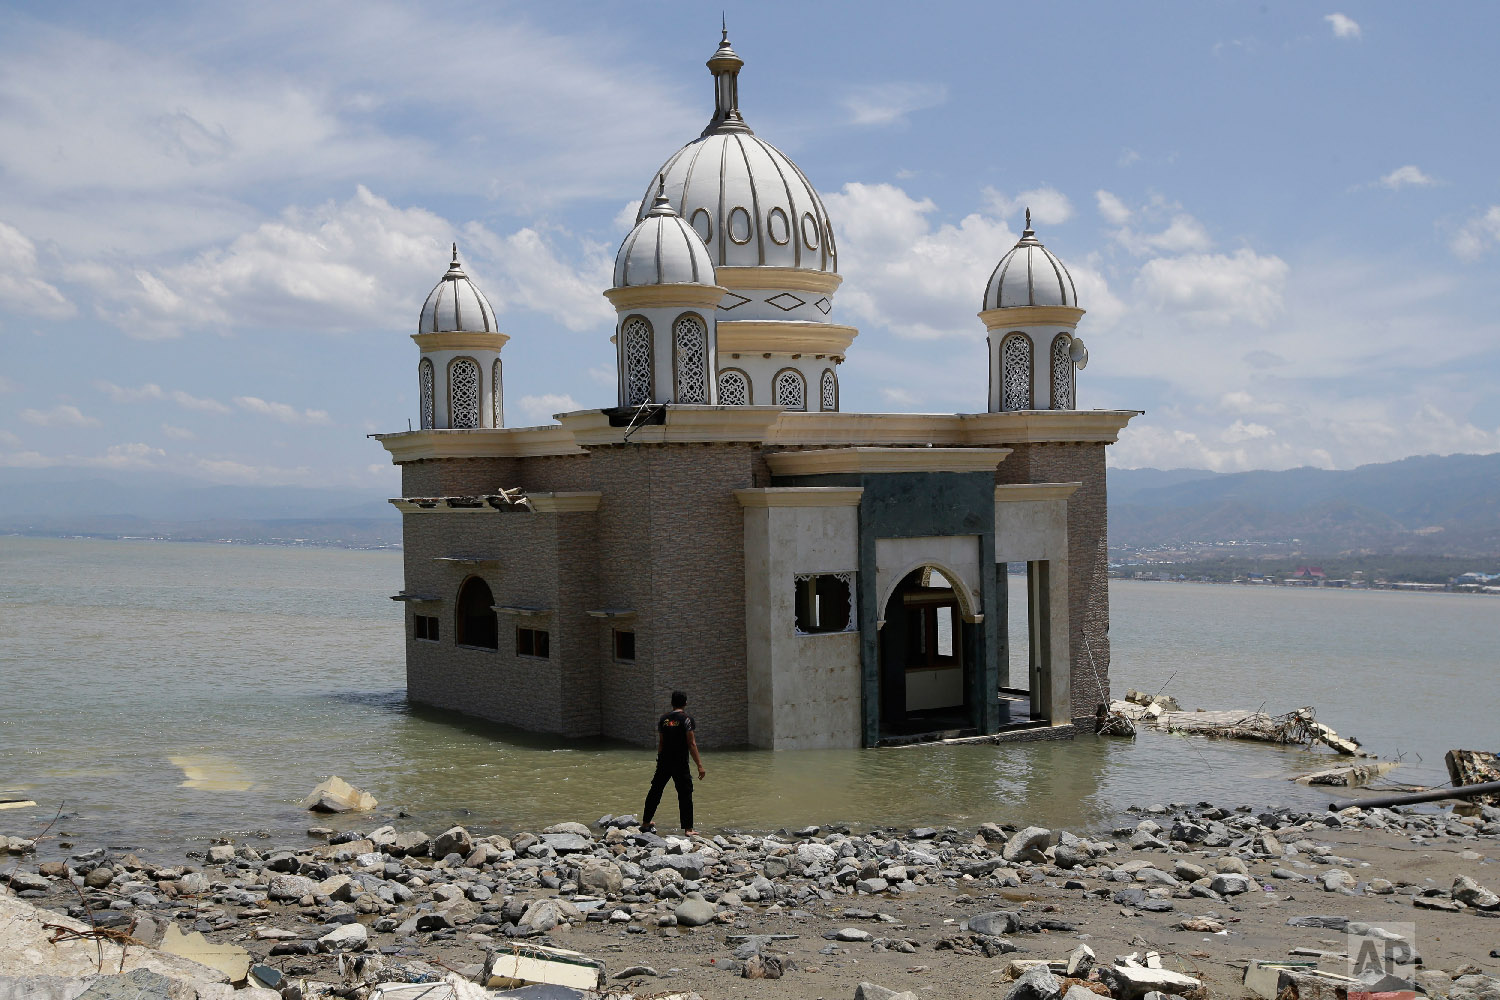  A man looks at a mosque that was isolated by water after its bridge was destroyed due to a massive earthquake and tsunami in Palu, Central Sulawesi, Indonesia, on Oct. 5, 2018. (AP Photo/Aaron Favila) 